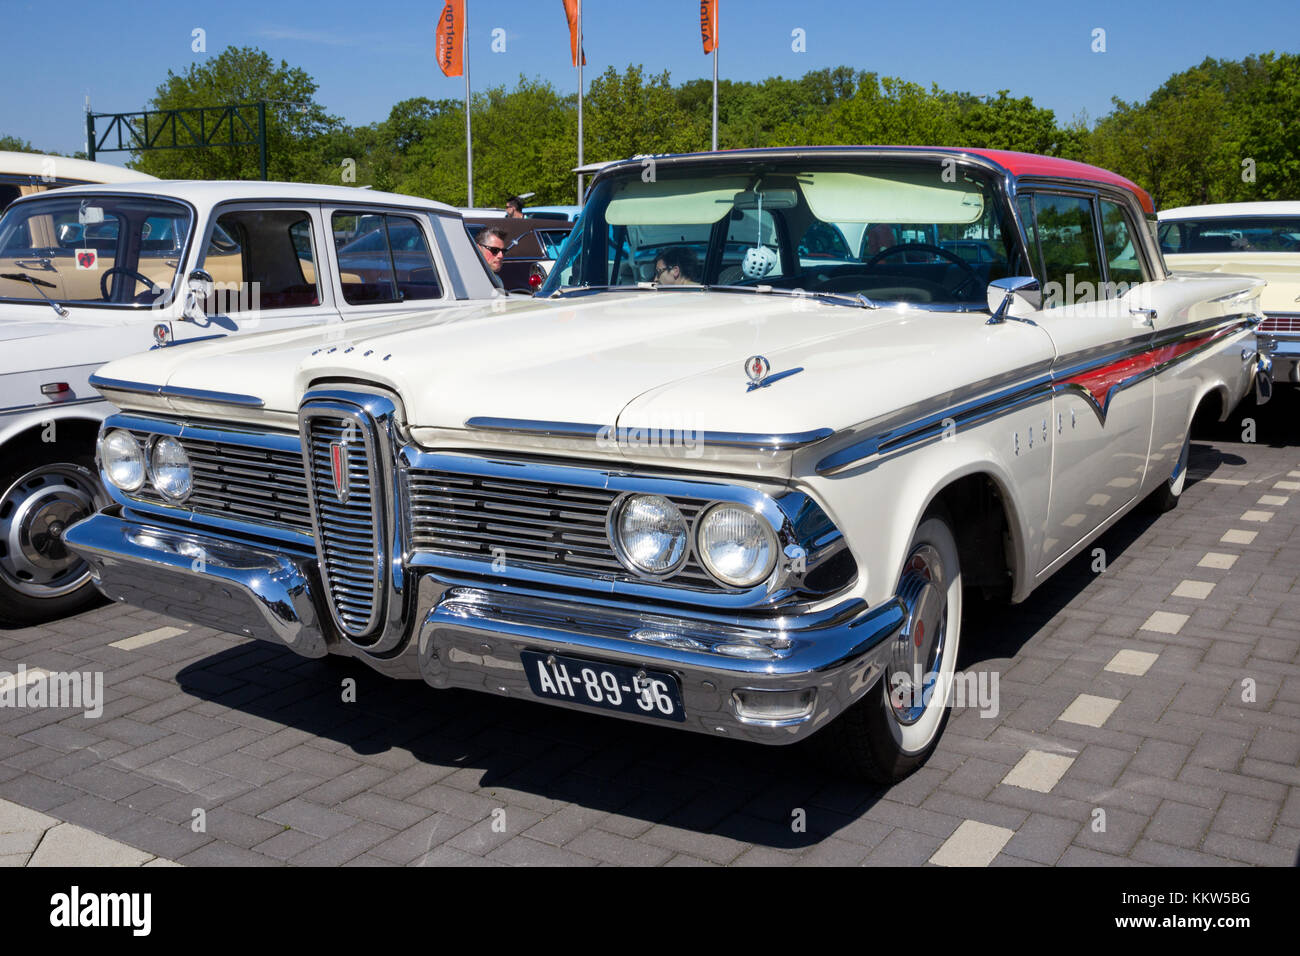 DEN BOSCH, THE NETHERLANDS - MAY 10, 2016: Vintage 1959 Ford Edsel classic car Stock Photo